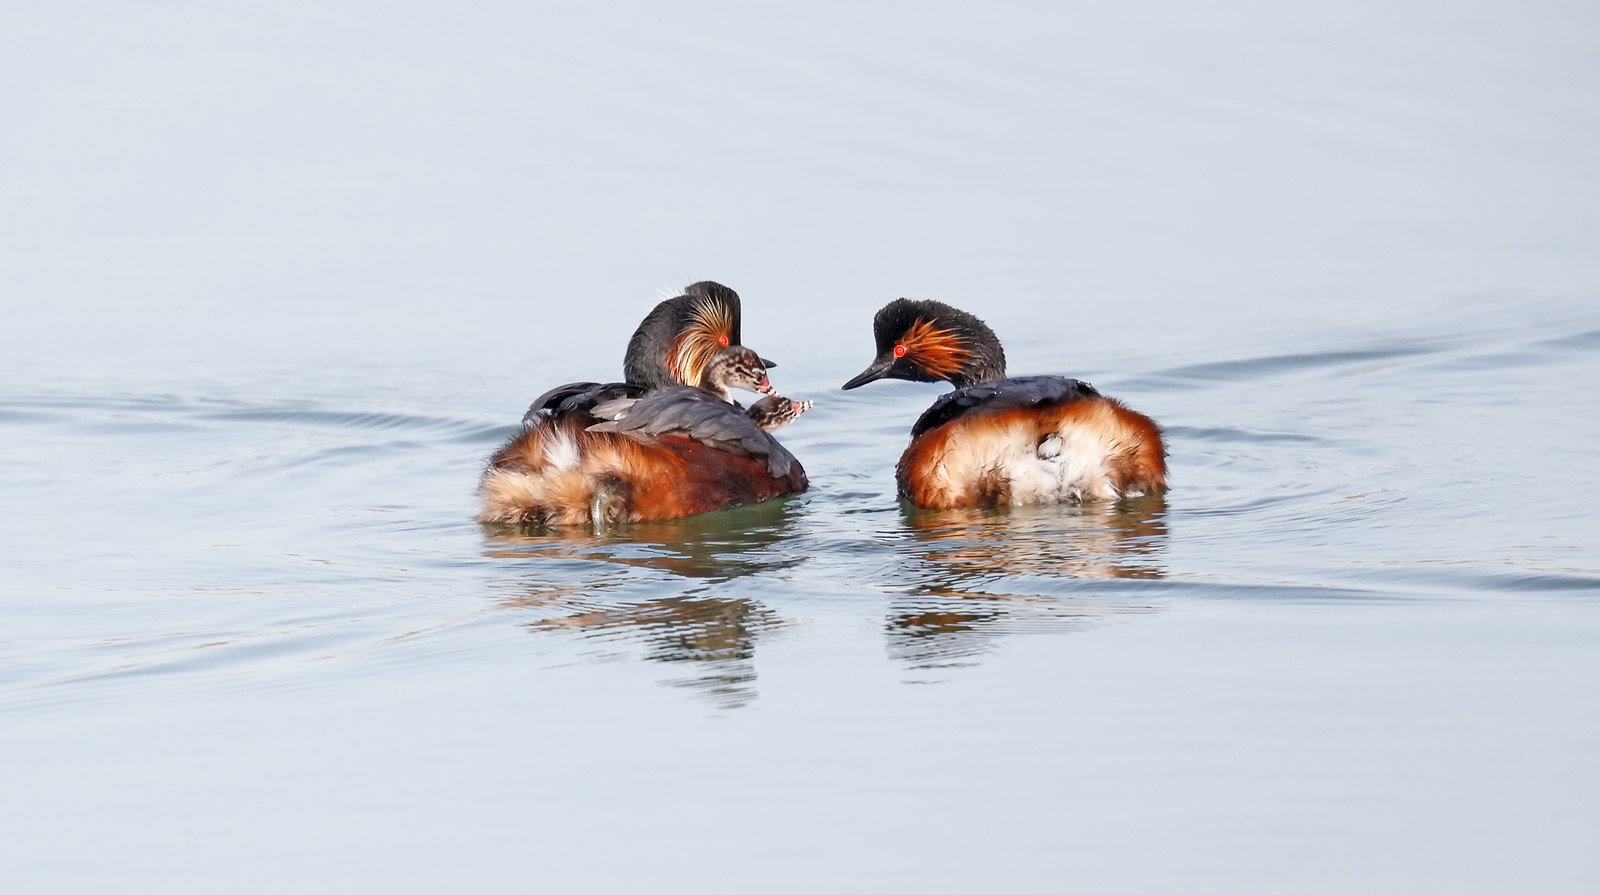 Black-necked Grebes and their young